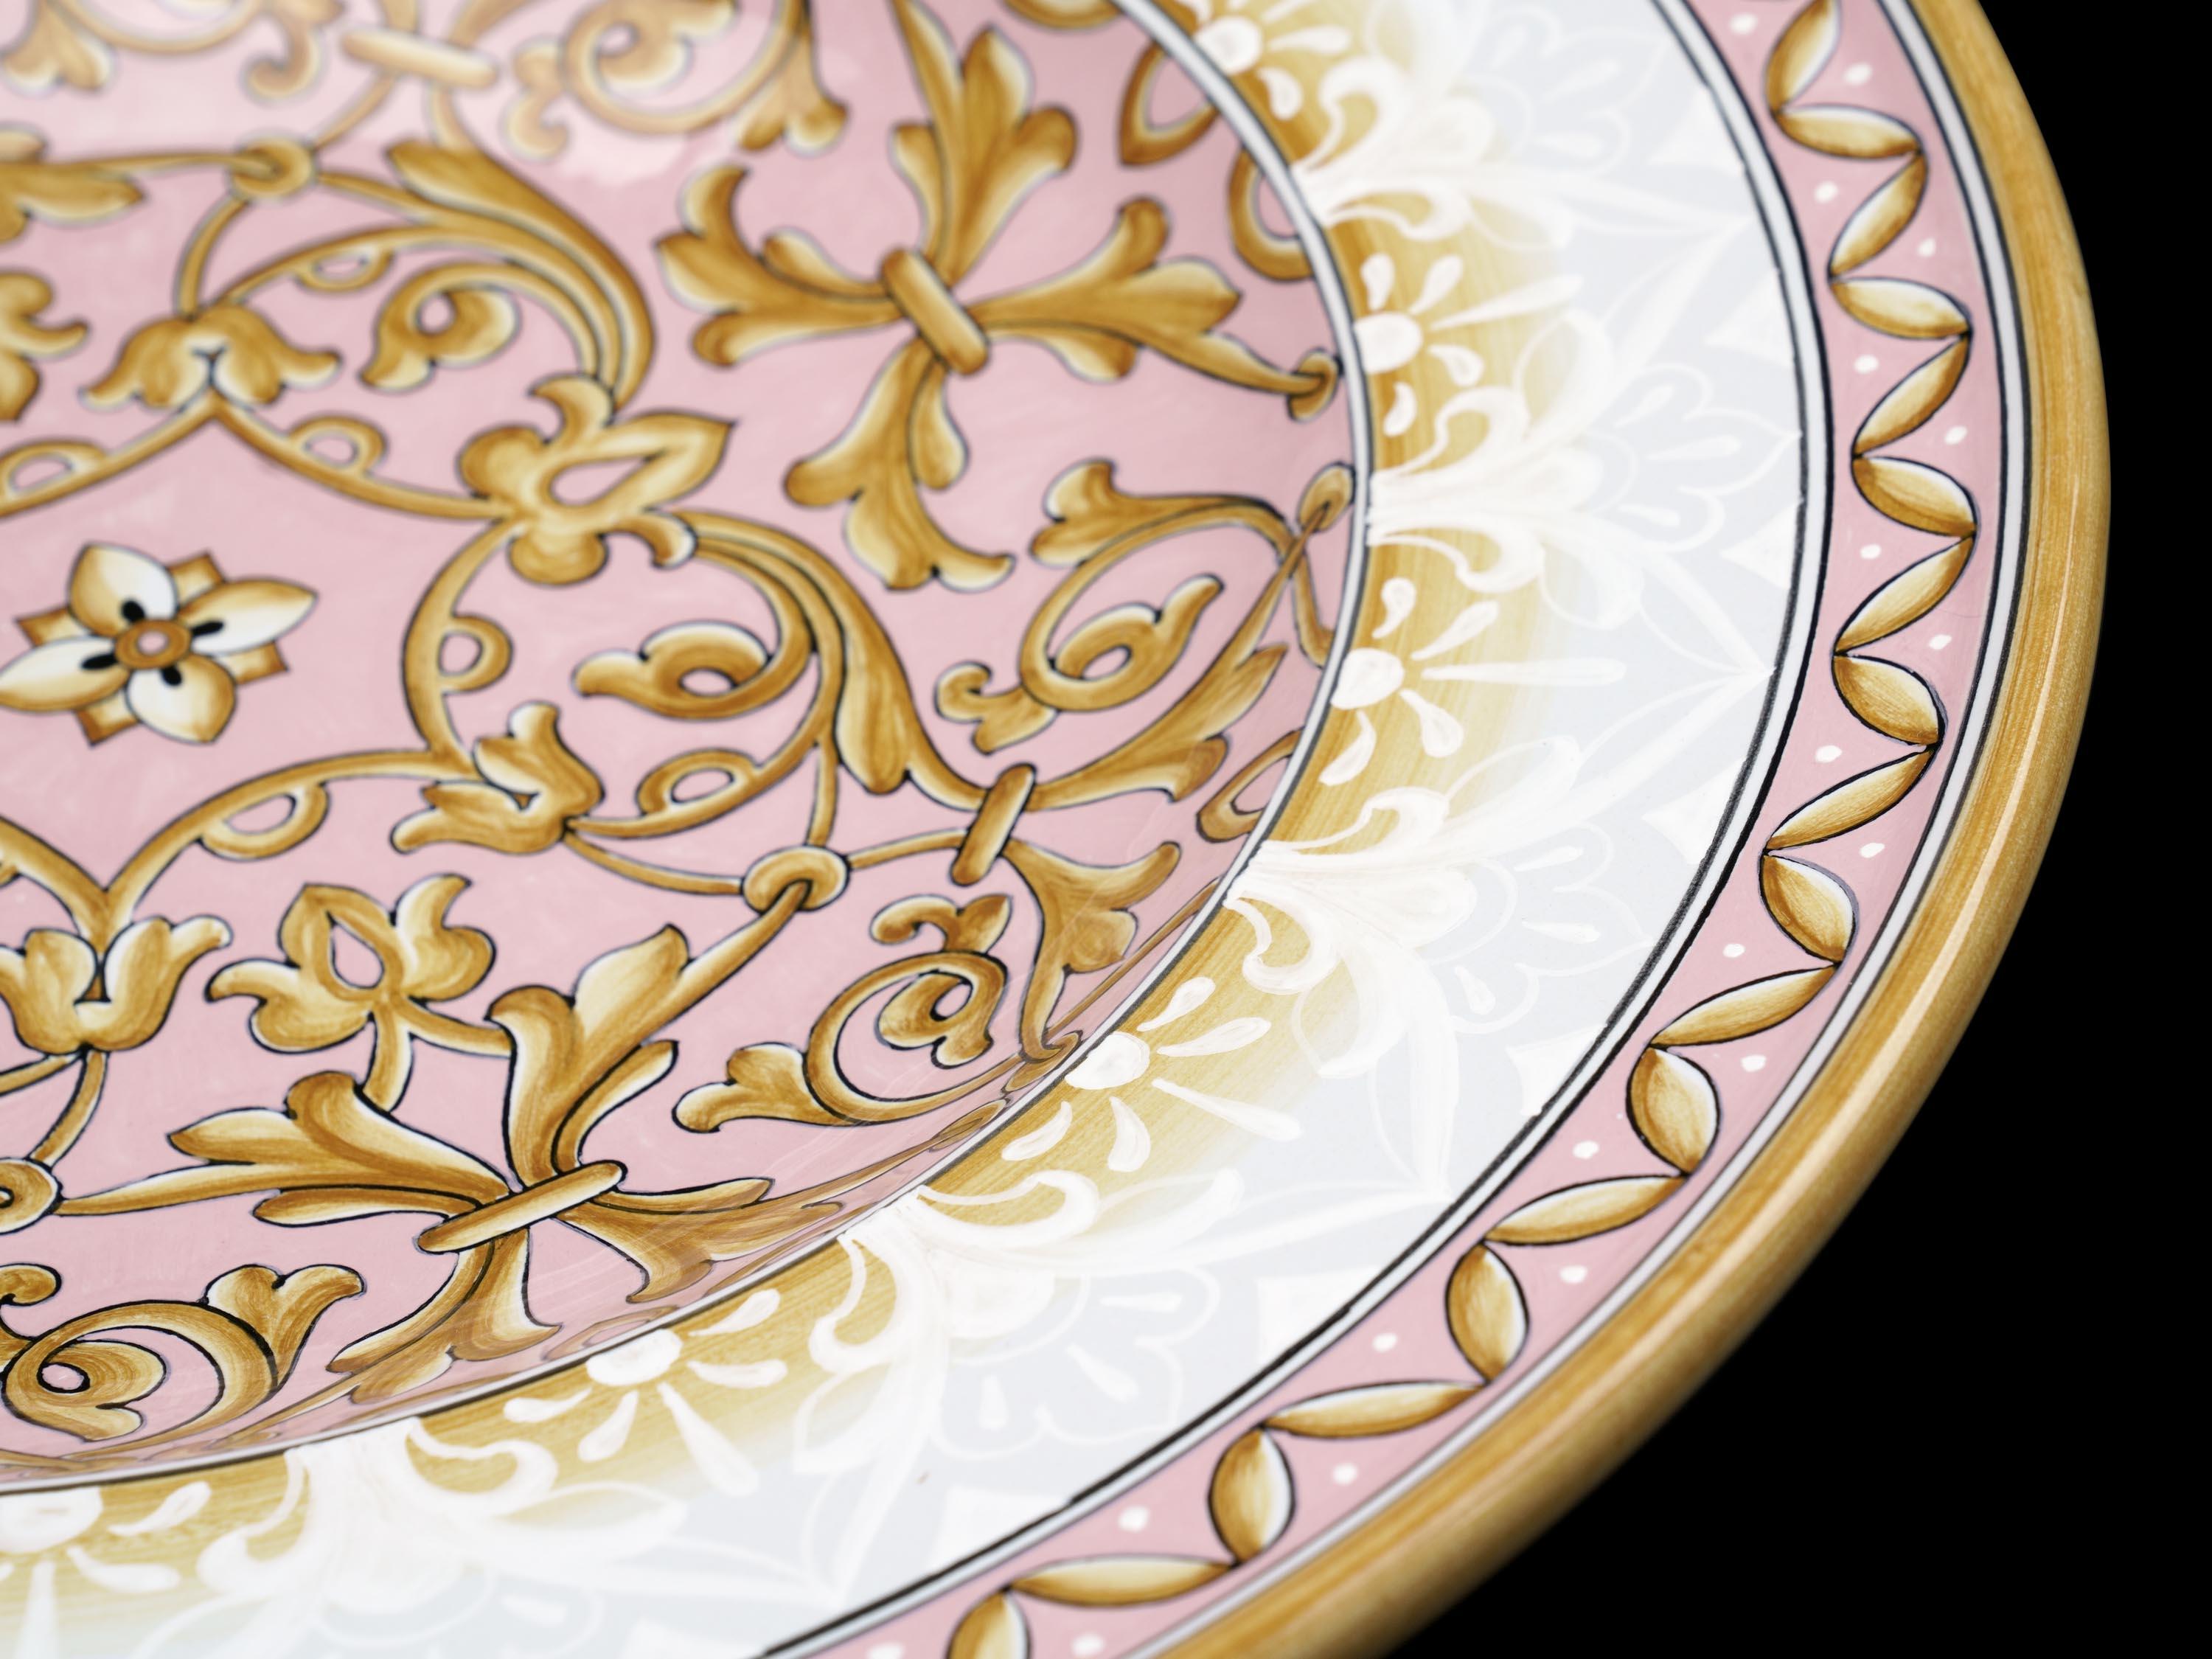 Large Ceramic Plate, Decorative Majolica Bowl Centerpiece, Pink White, In Stock For Sale 5